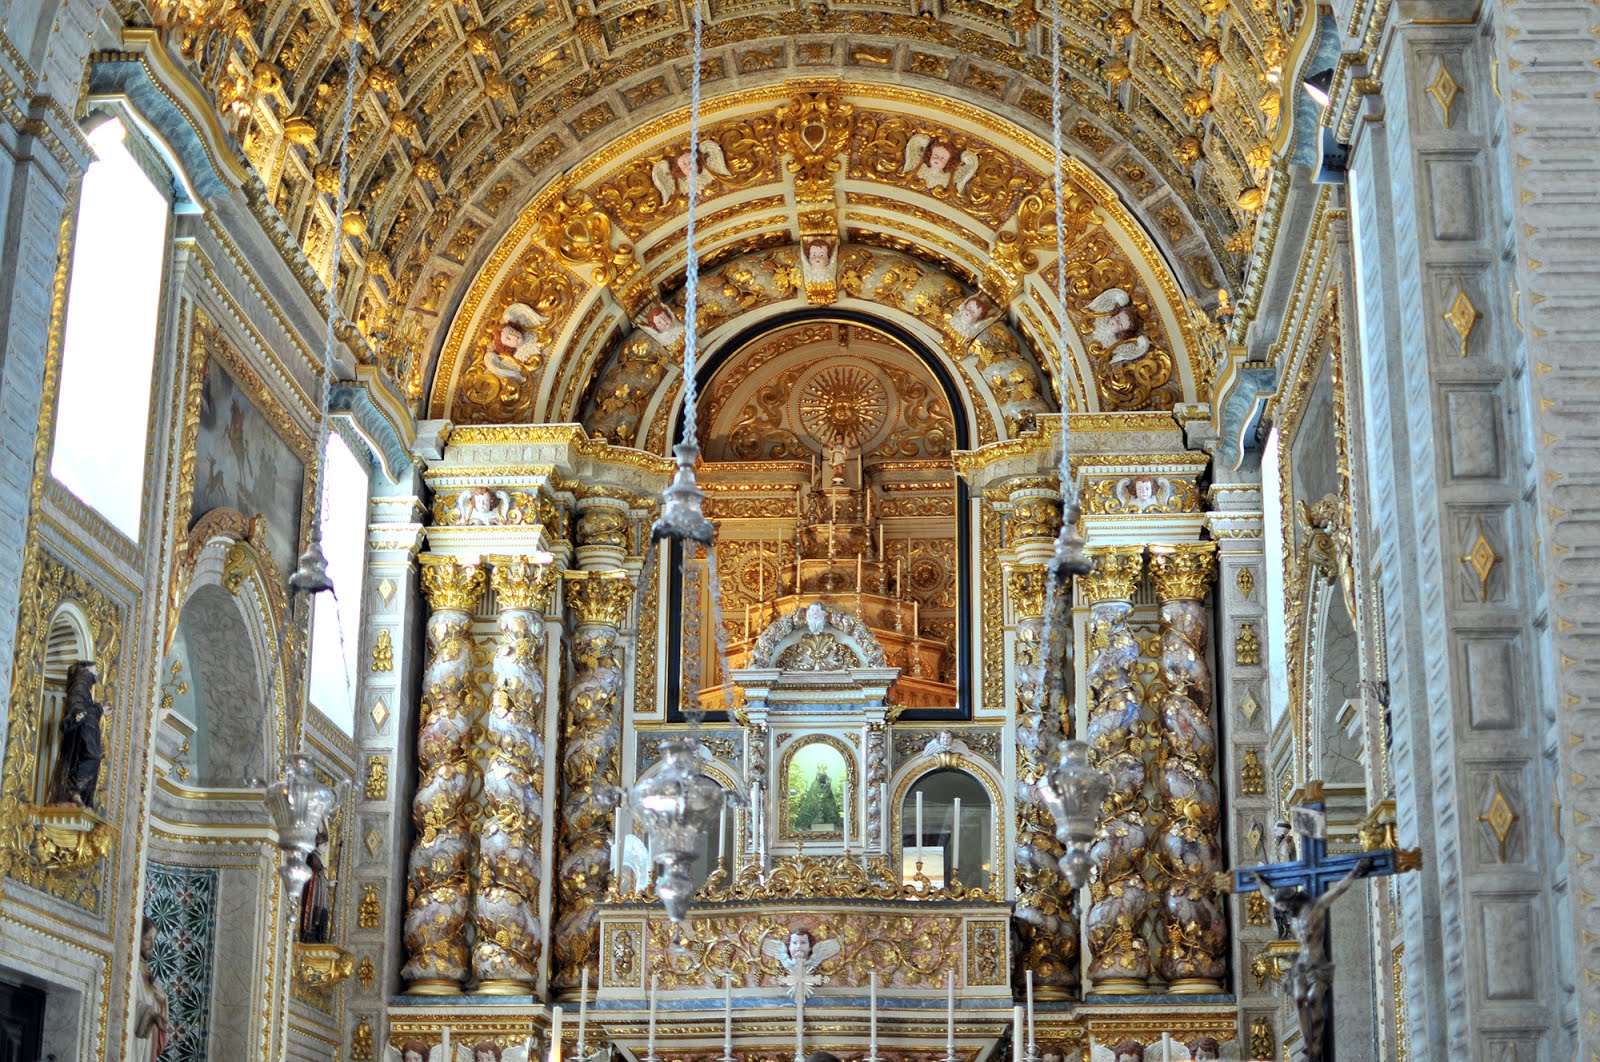 Interior of the Sanctuary of Our Lady of Nazaré